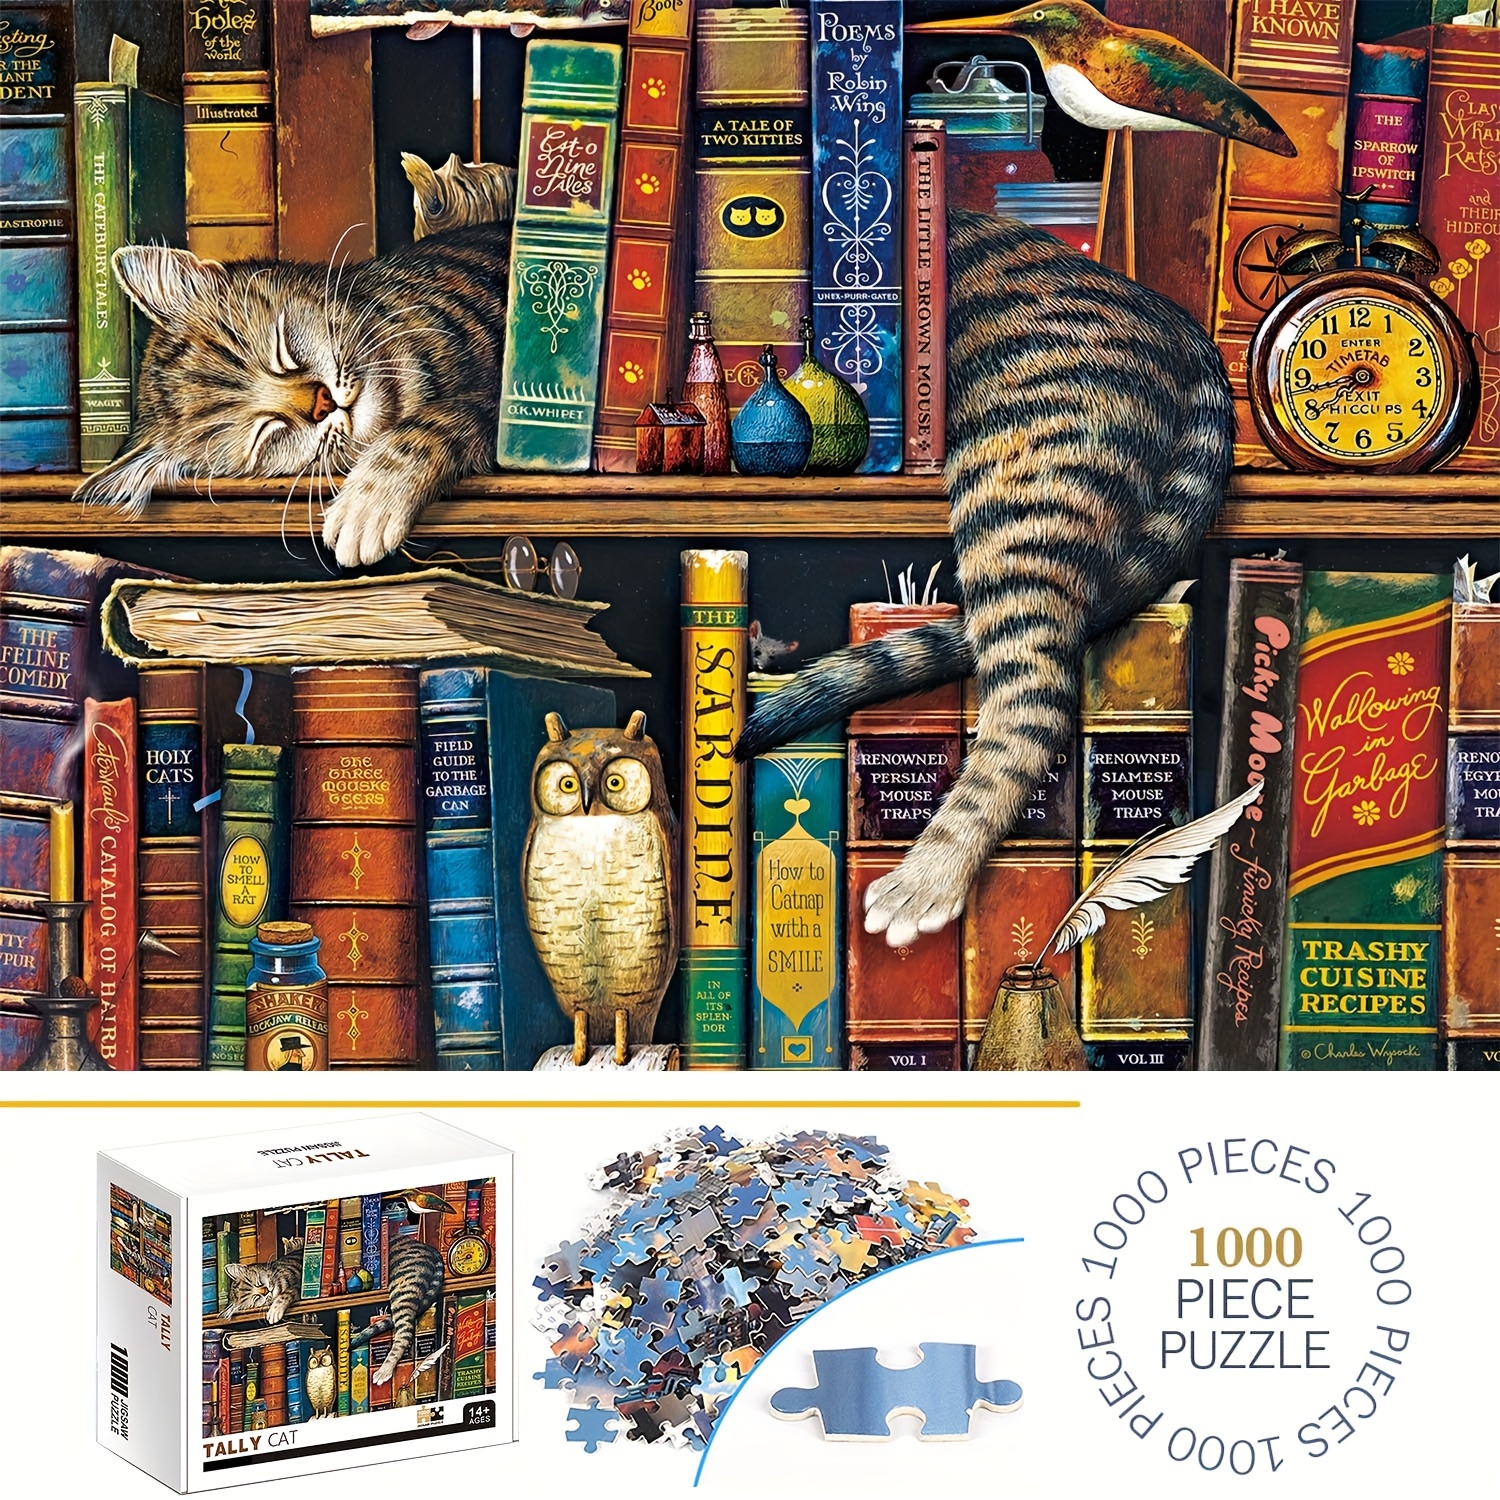 

1000pcs Tally Cat Puzzle, Thick And Durable Seamless For Adults Fun Family Challenging Puzzle For Birthday, Christmas, Halloween, Thanksgiving, Easter